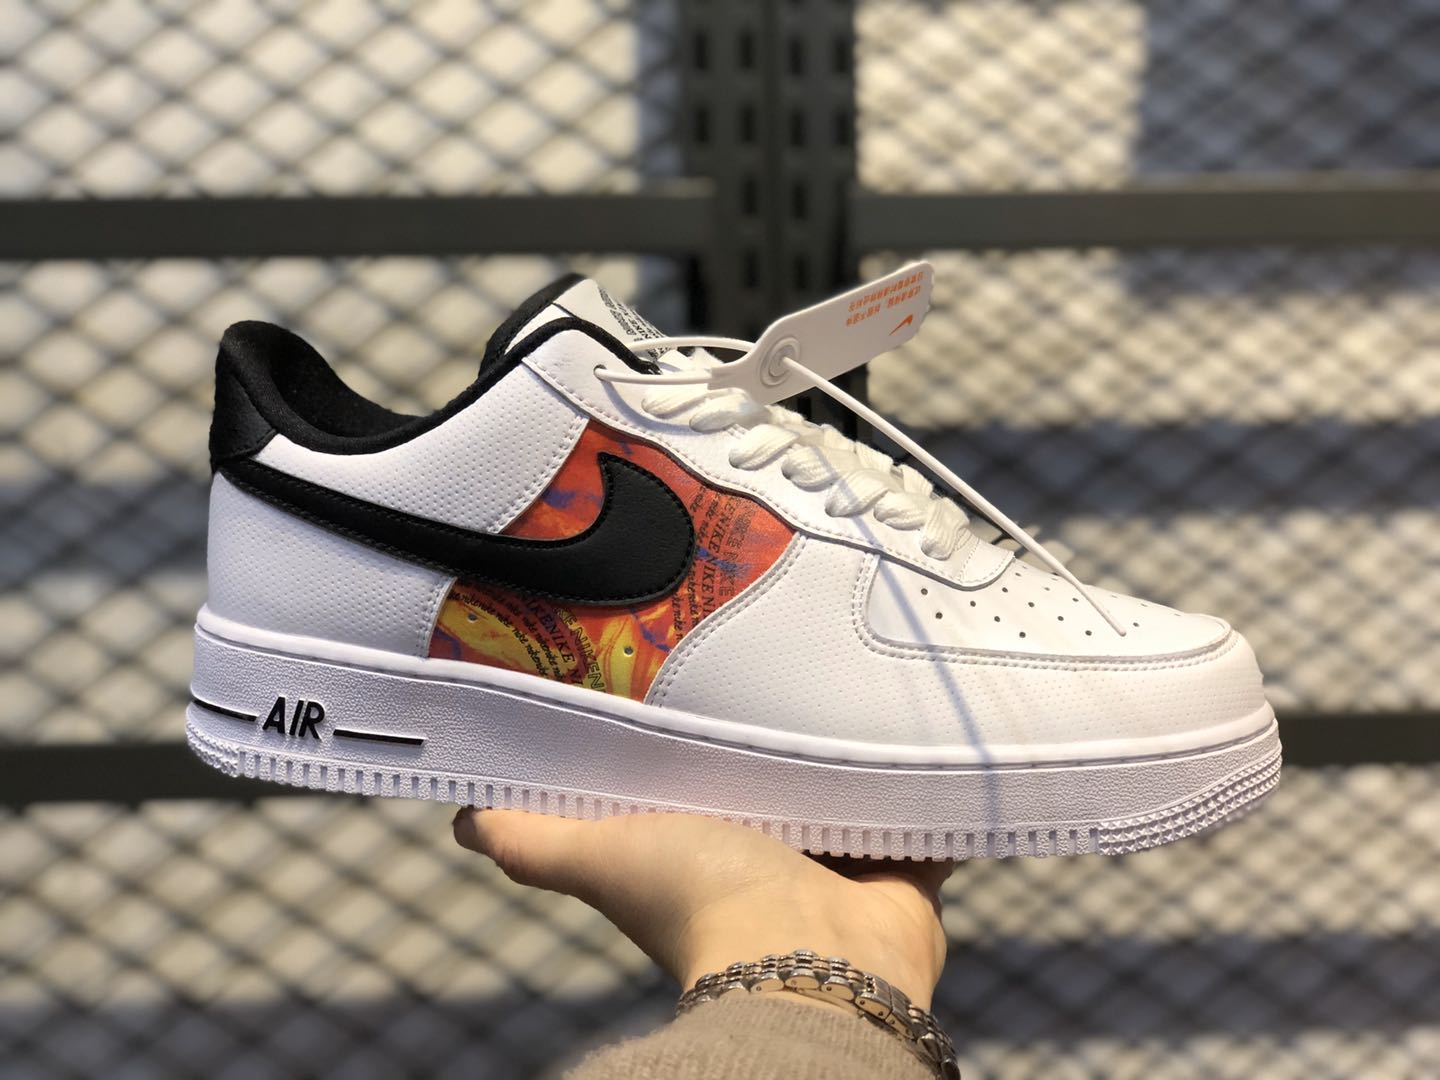 Nike Air Force 1 Low White/Multi-Color/Black To Buy Cu4734-100 serapportantà Coloriage Air Force 1,